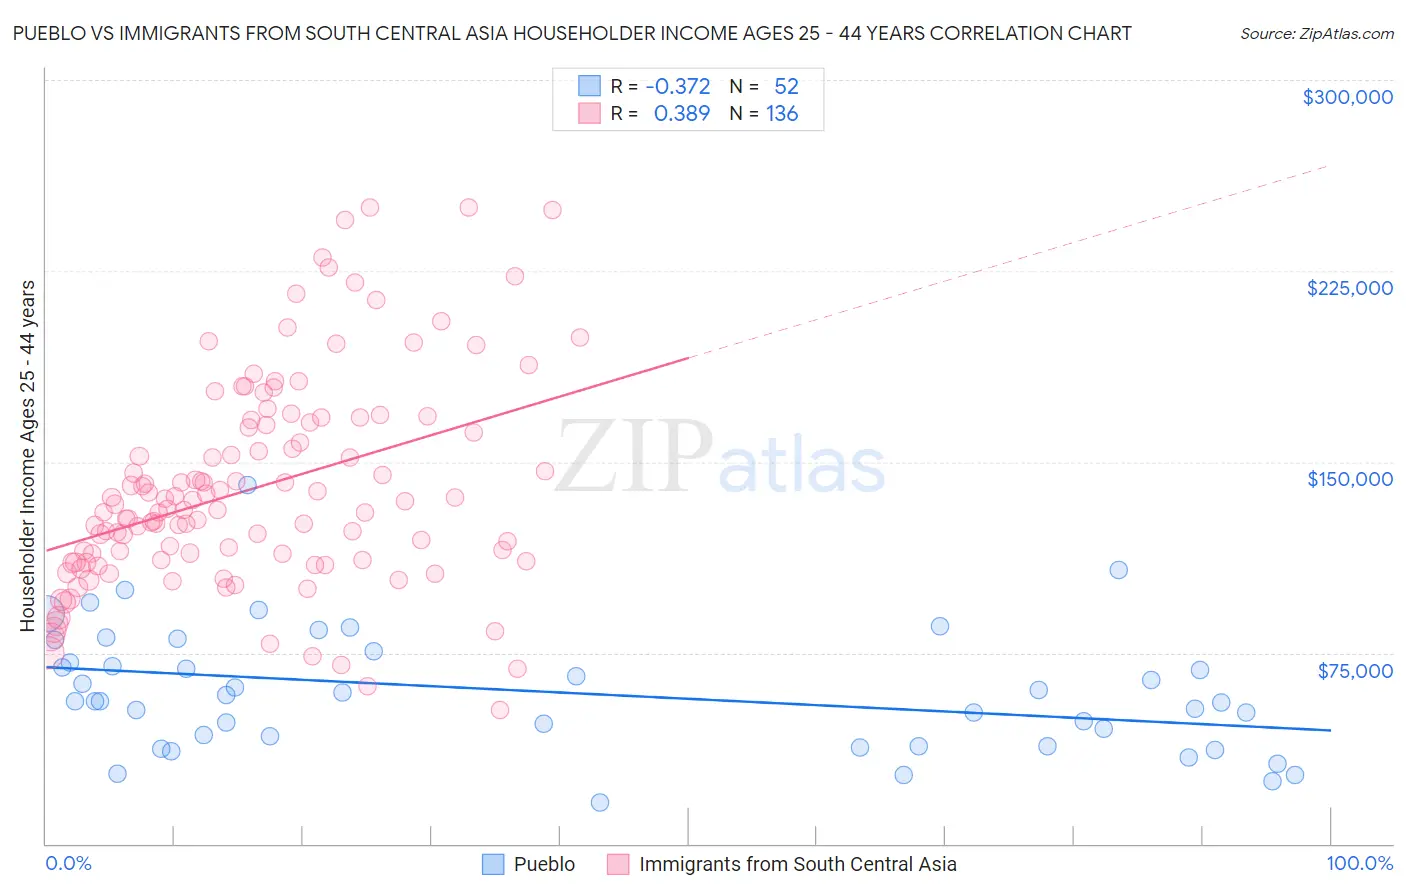 Pueblo vs Immigrants from South Central Asia Householder Income Ages 25 - 44 years